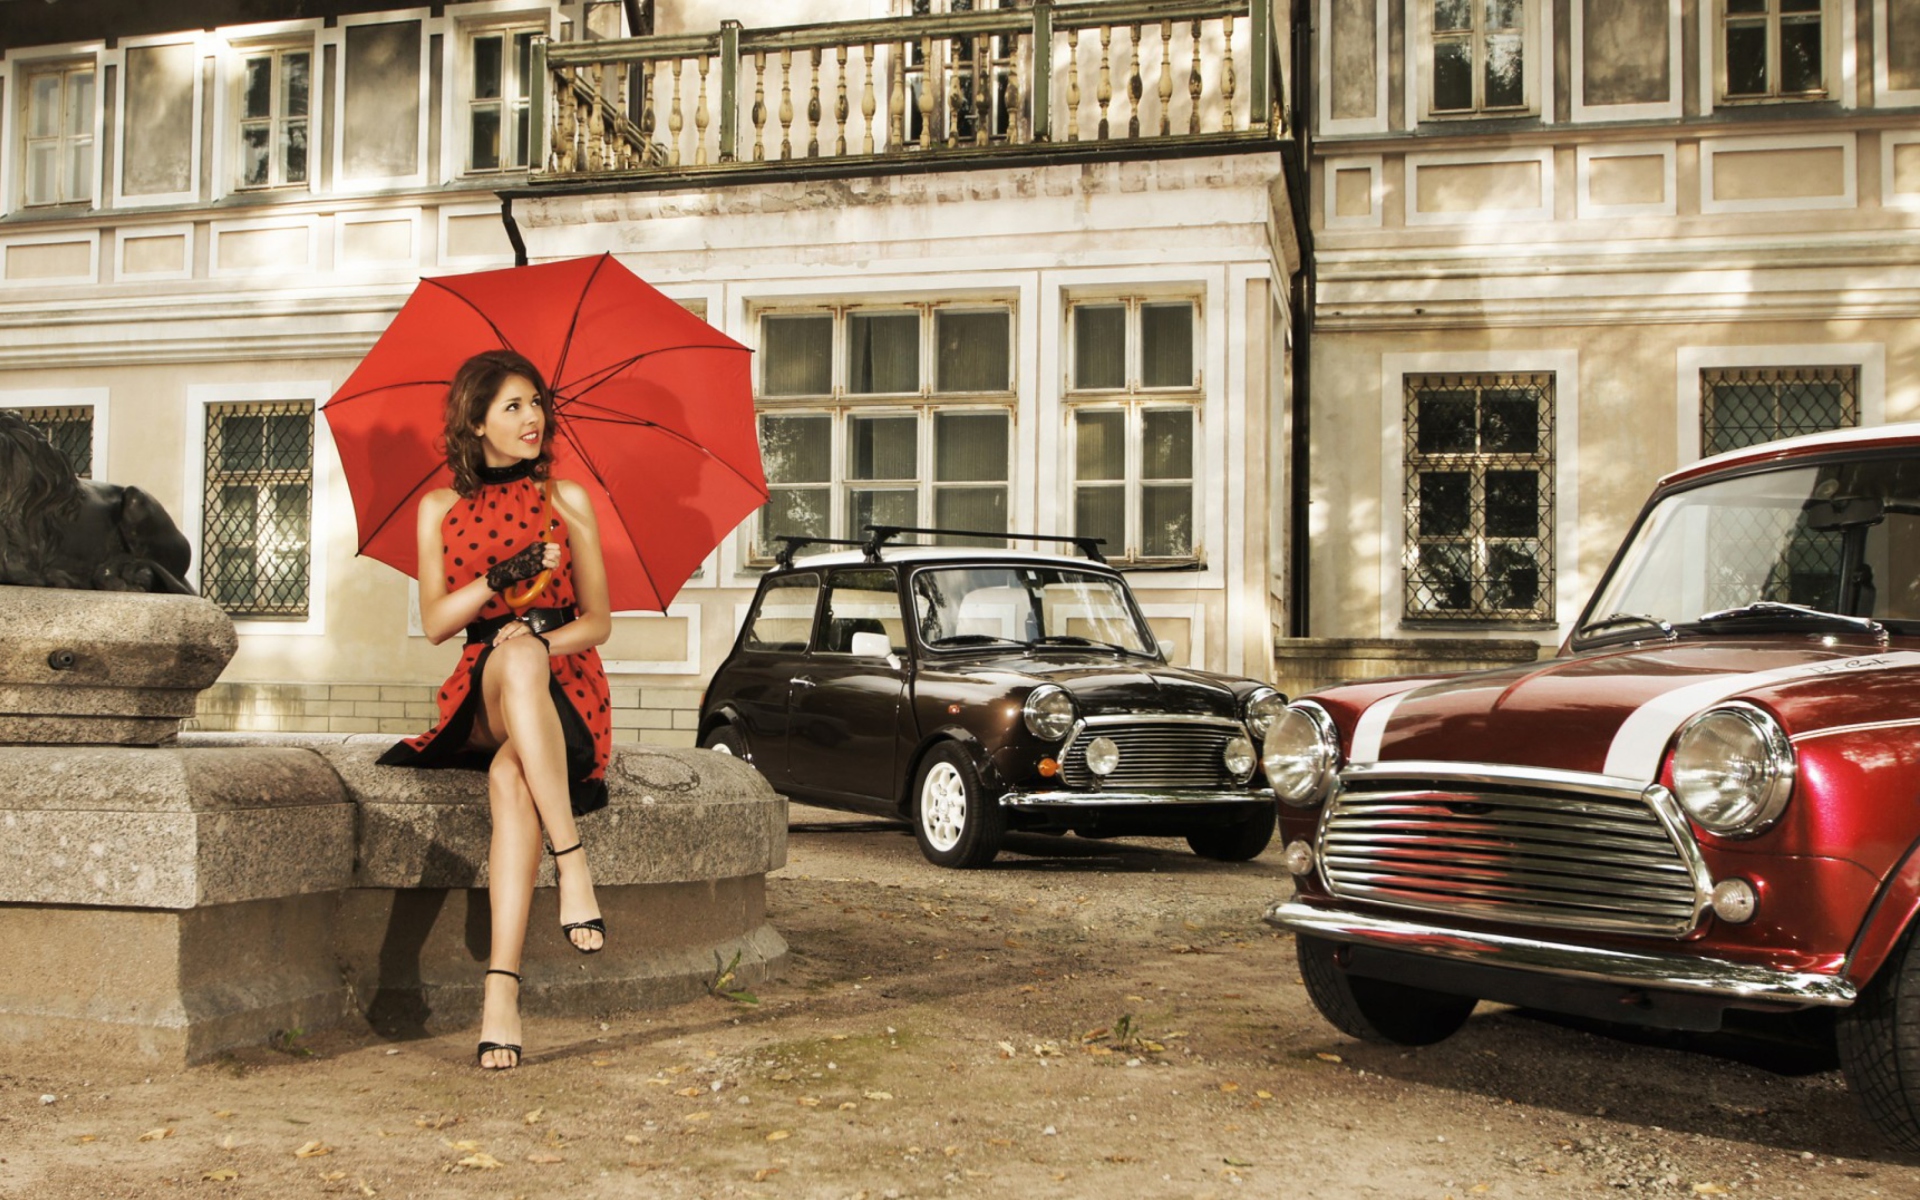 Girl With Red Umbrella And Vintage Mini Cooper screenshot #1 1920x1200